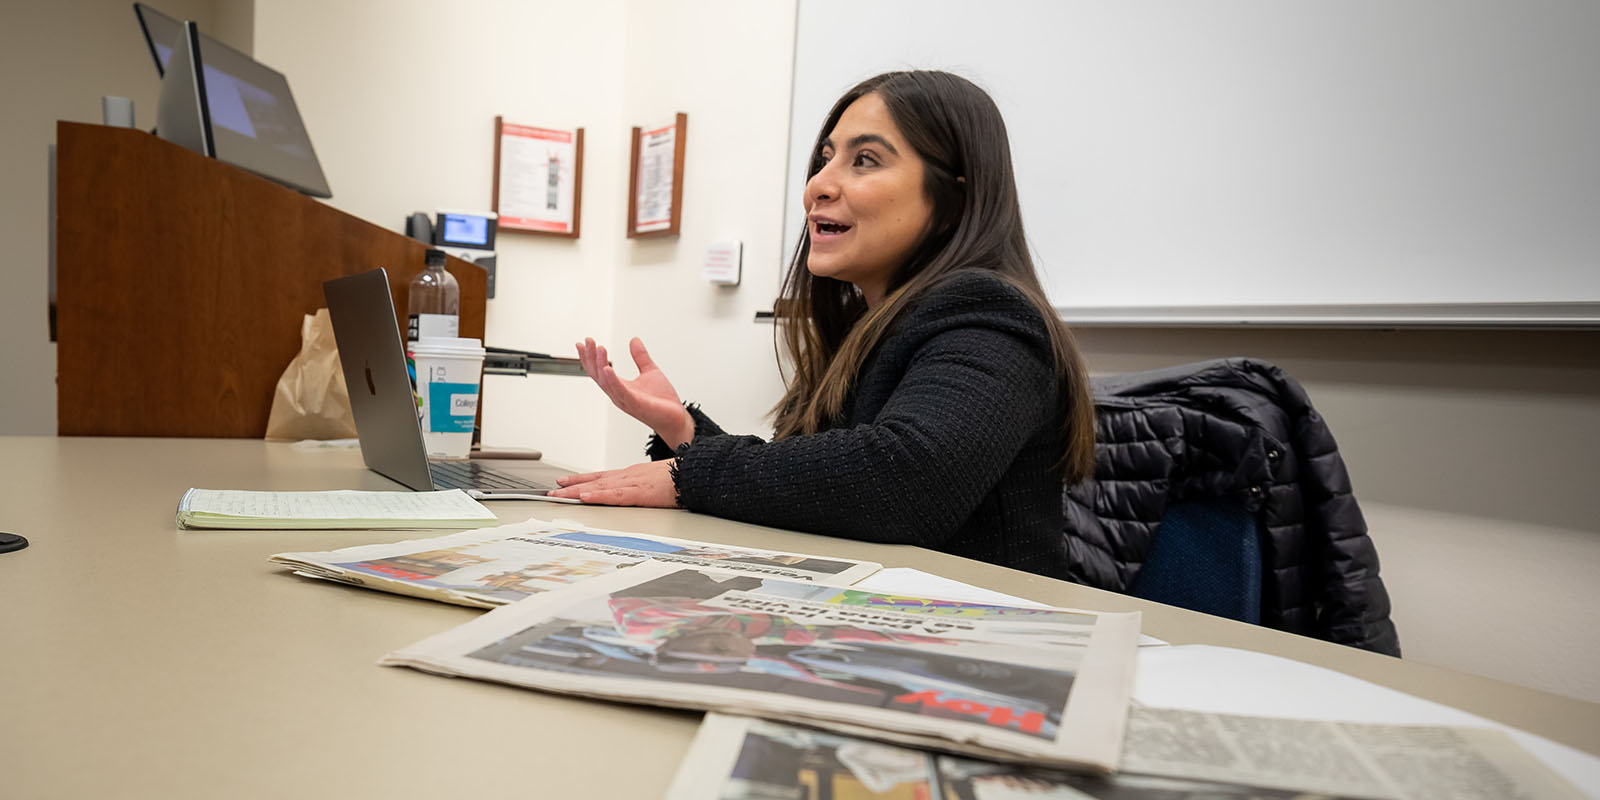 Laura Rodriguez teaches from the front of a classroom with newspapers spread in front of her